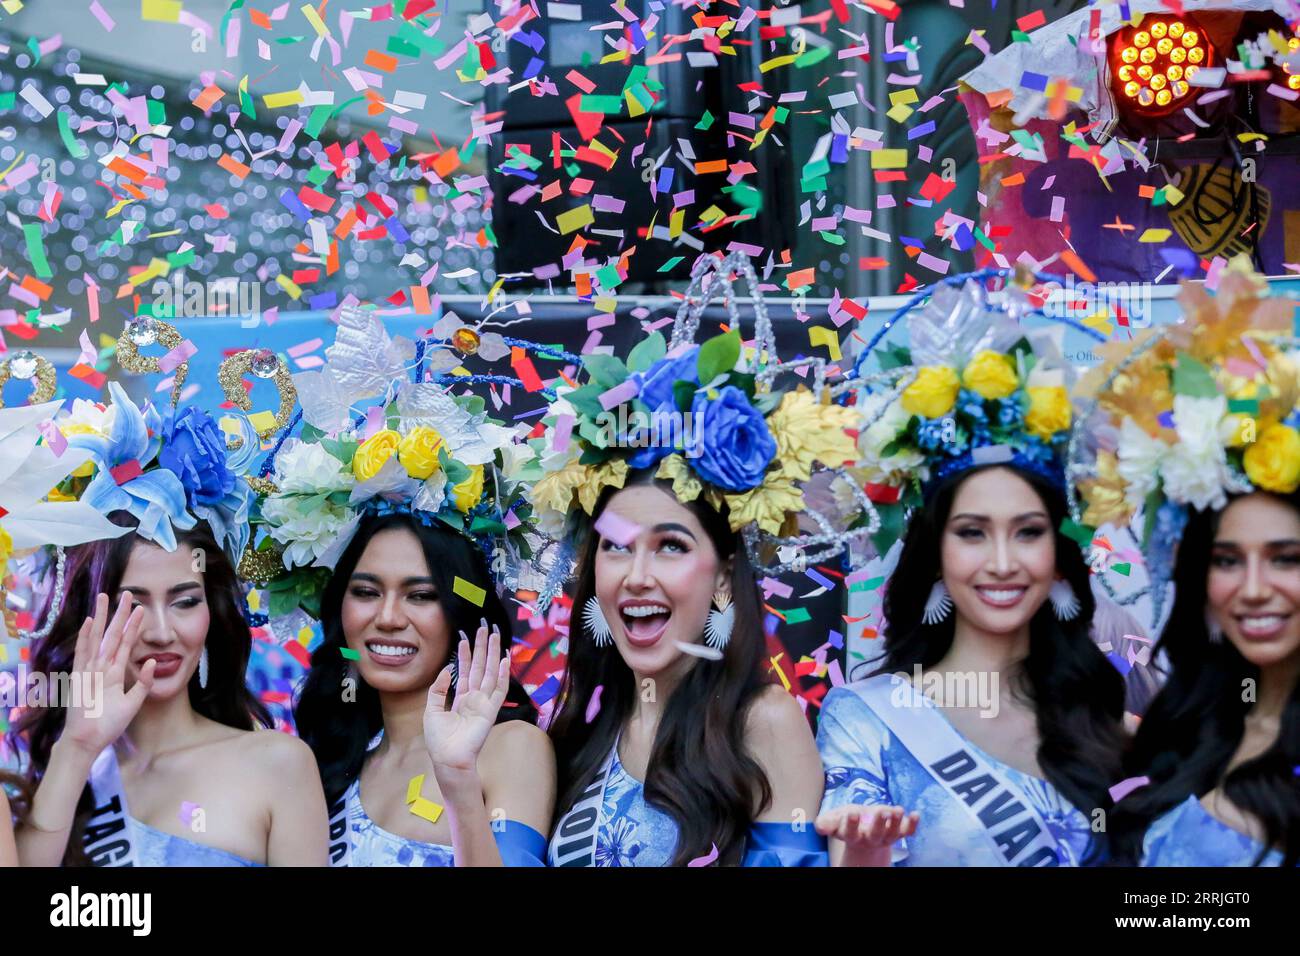 220723 -- QUEZON CITY, July 23, 2022 -- Contestants for the Binibining Pilipinas Miss Philippines 2022 attend the Grand Parade of Beauties in Quezon City, the Philippines on July 23, 2022. A total of 40 contestants will vie for the Binibining Pilipinas 2022 beauty pageant this year.  PHILIPPINES-QUEZON CITY-BEAUTY CONTEST-PARADE RouellexUmali PUBLICATIONxNOTxINxCHN Stock Photo